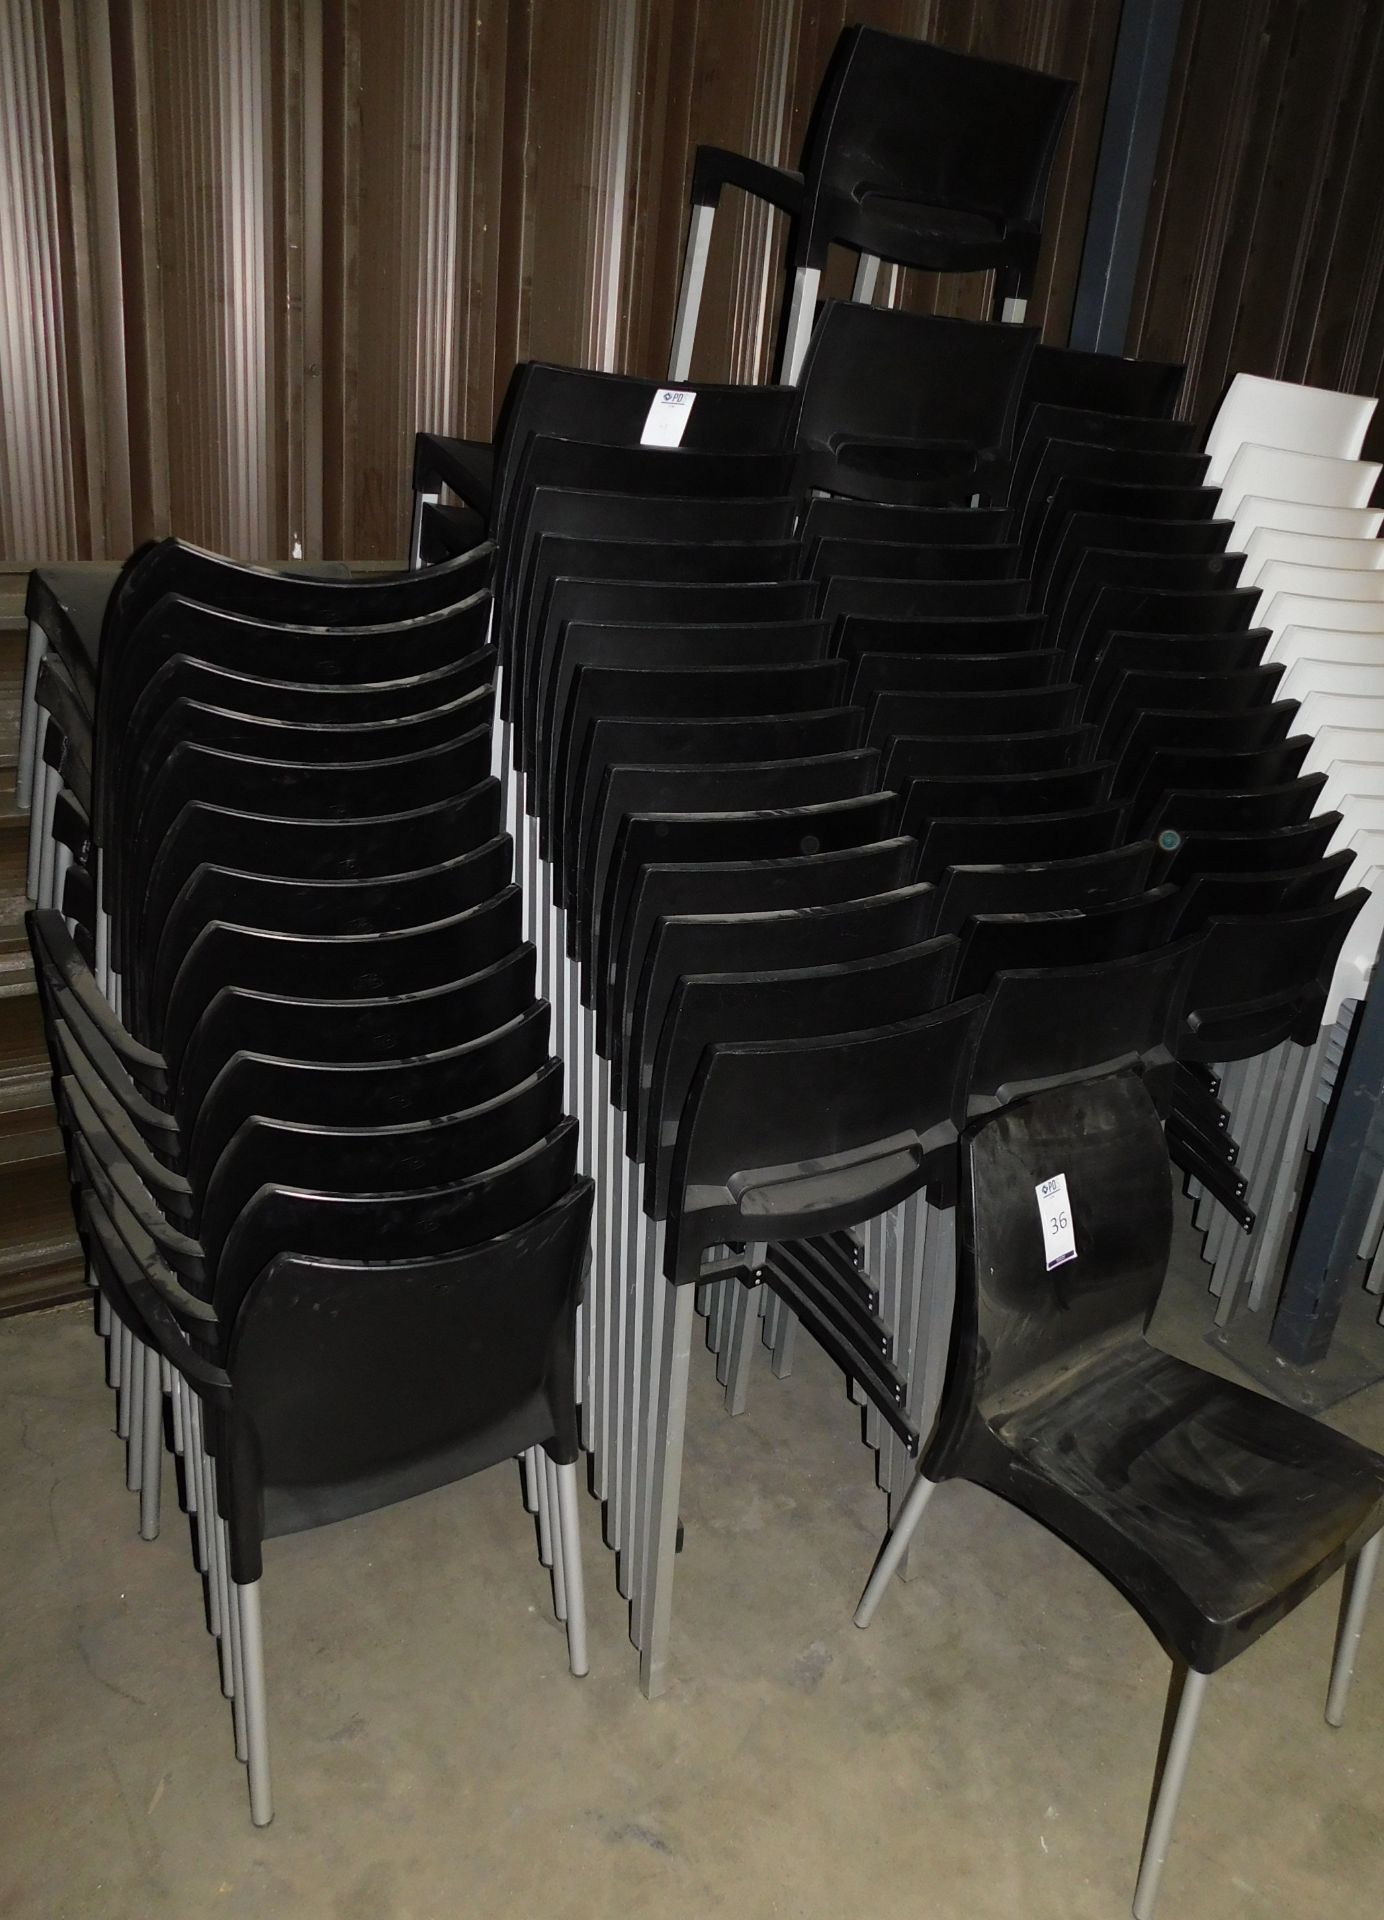 40 Black Stax Stools & 14 Stacking Chairs (Located Huntingdon, See General Notes for More Details) - Image 4 of 4